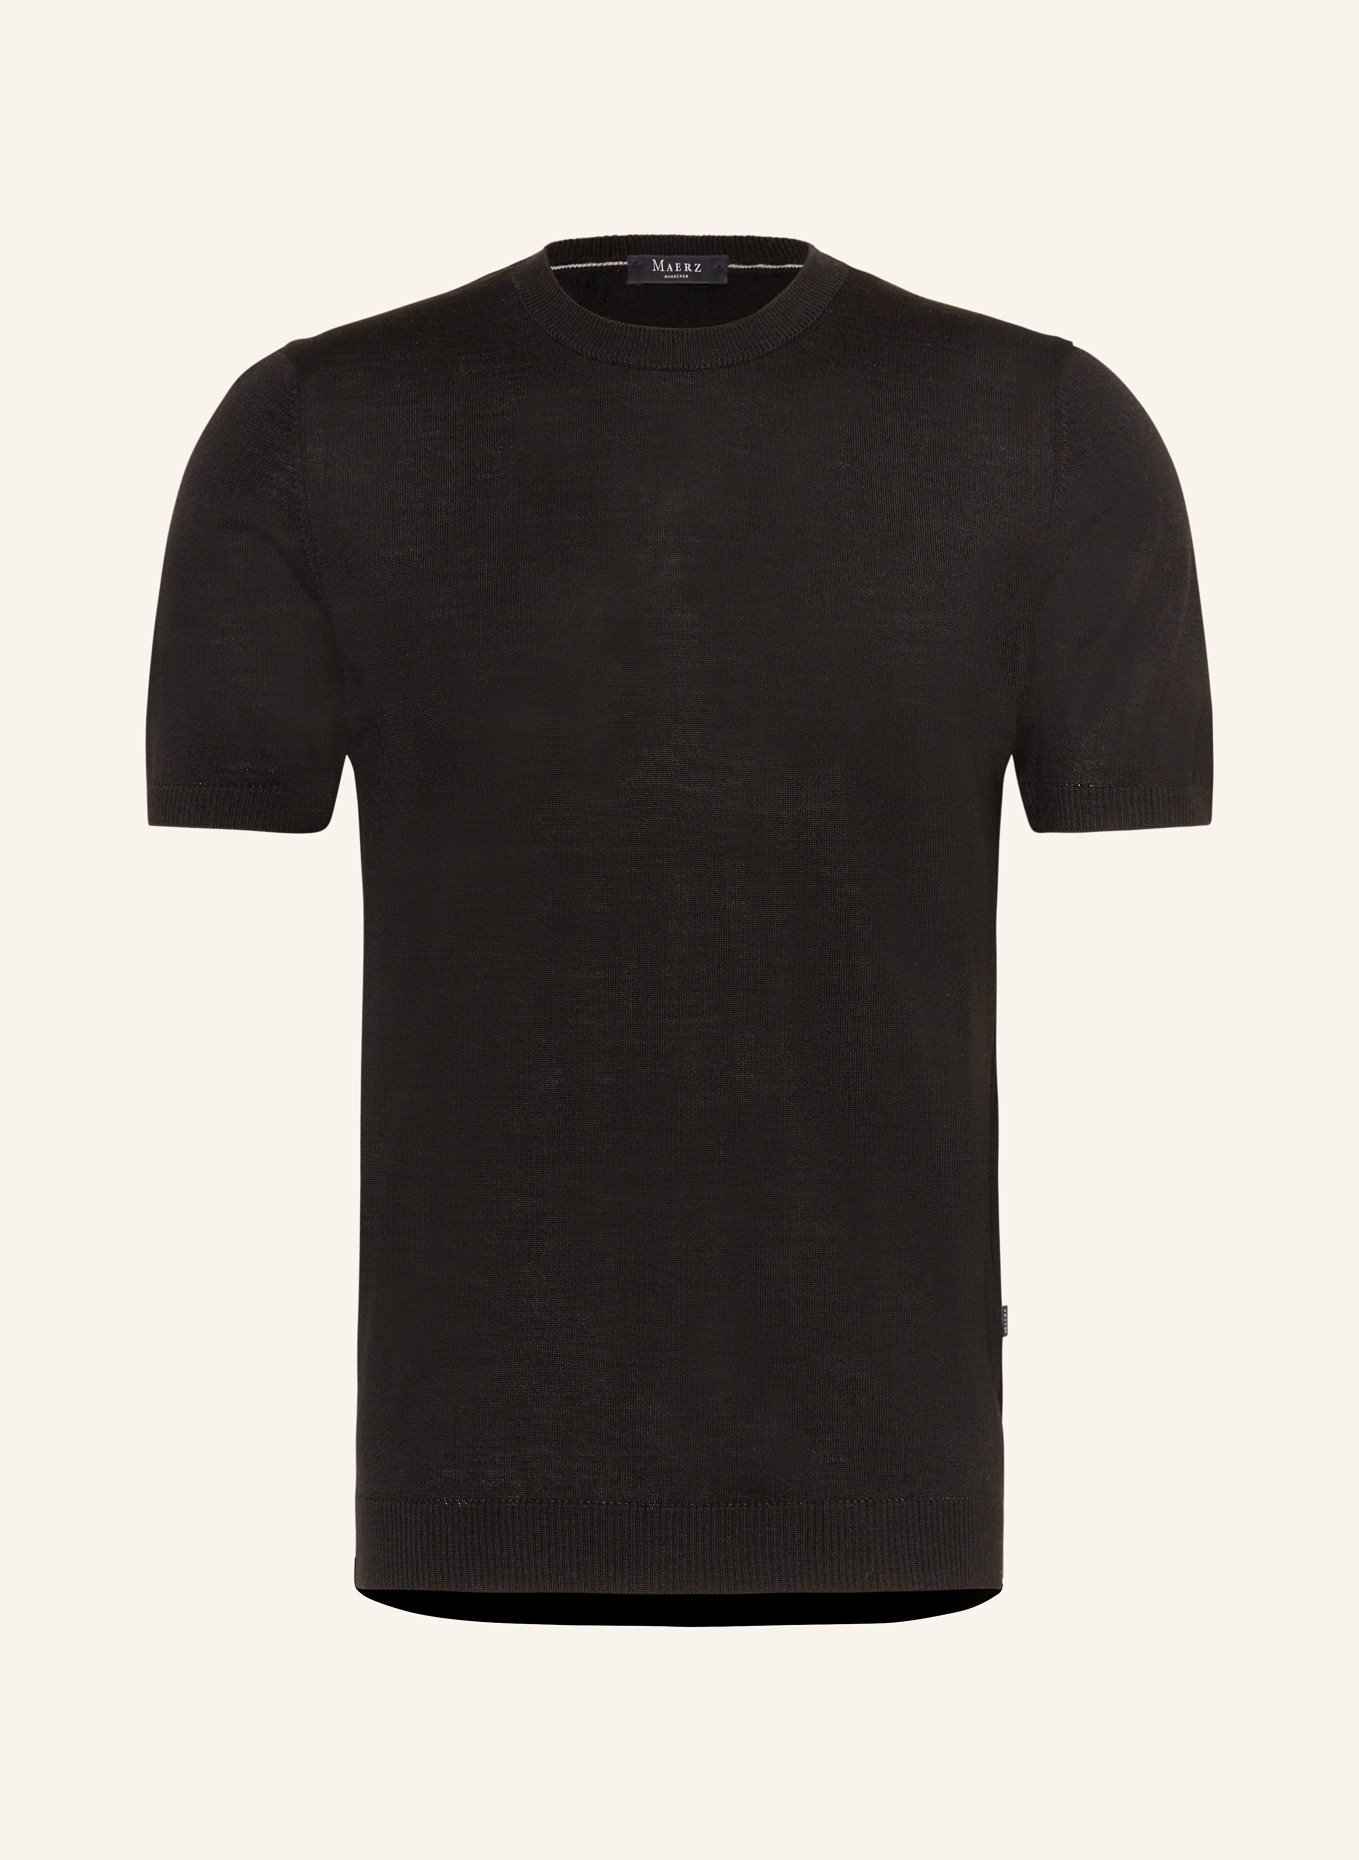 MAERZ MUENCHEN Knit shirt made of merino wool, Color: BLACK (Image 1)